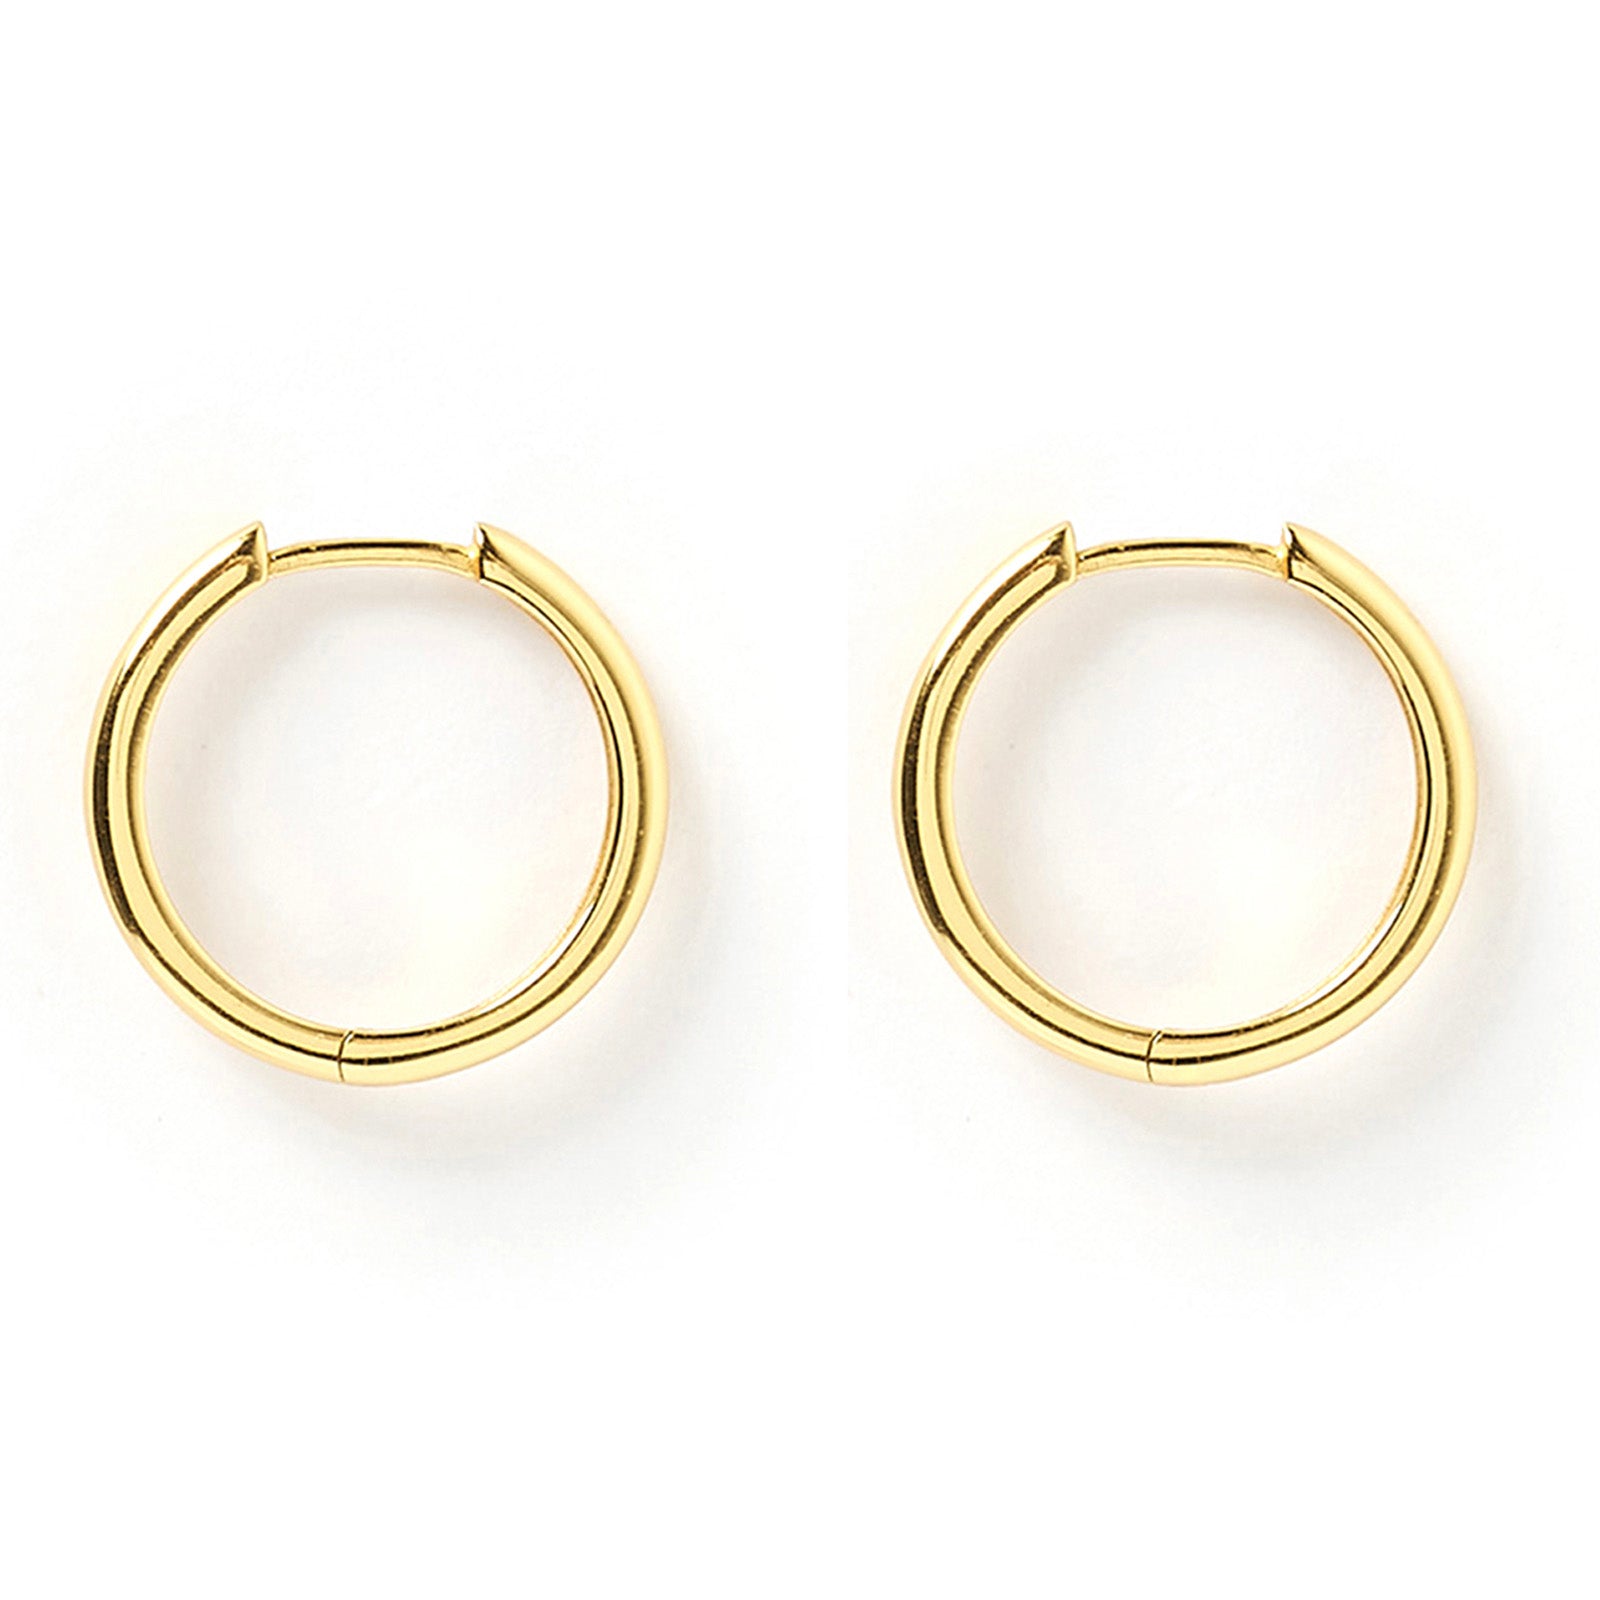 Buy Shining Jewel - By Shivansh Classic and Evergreen Designer Gold Hoop  Earrings Combo for Women - Pack of 2 (SJEC_36) at Amazon.in